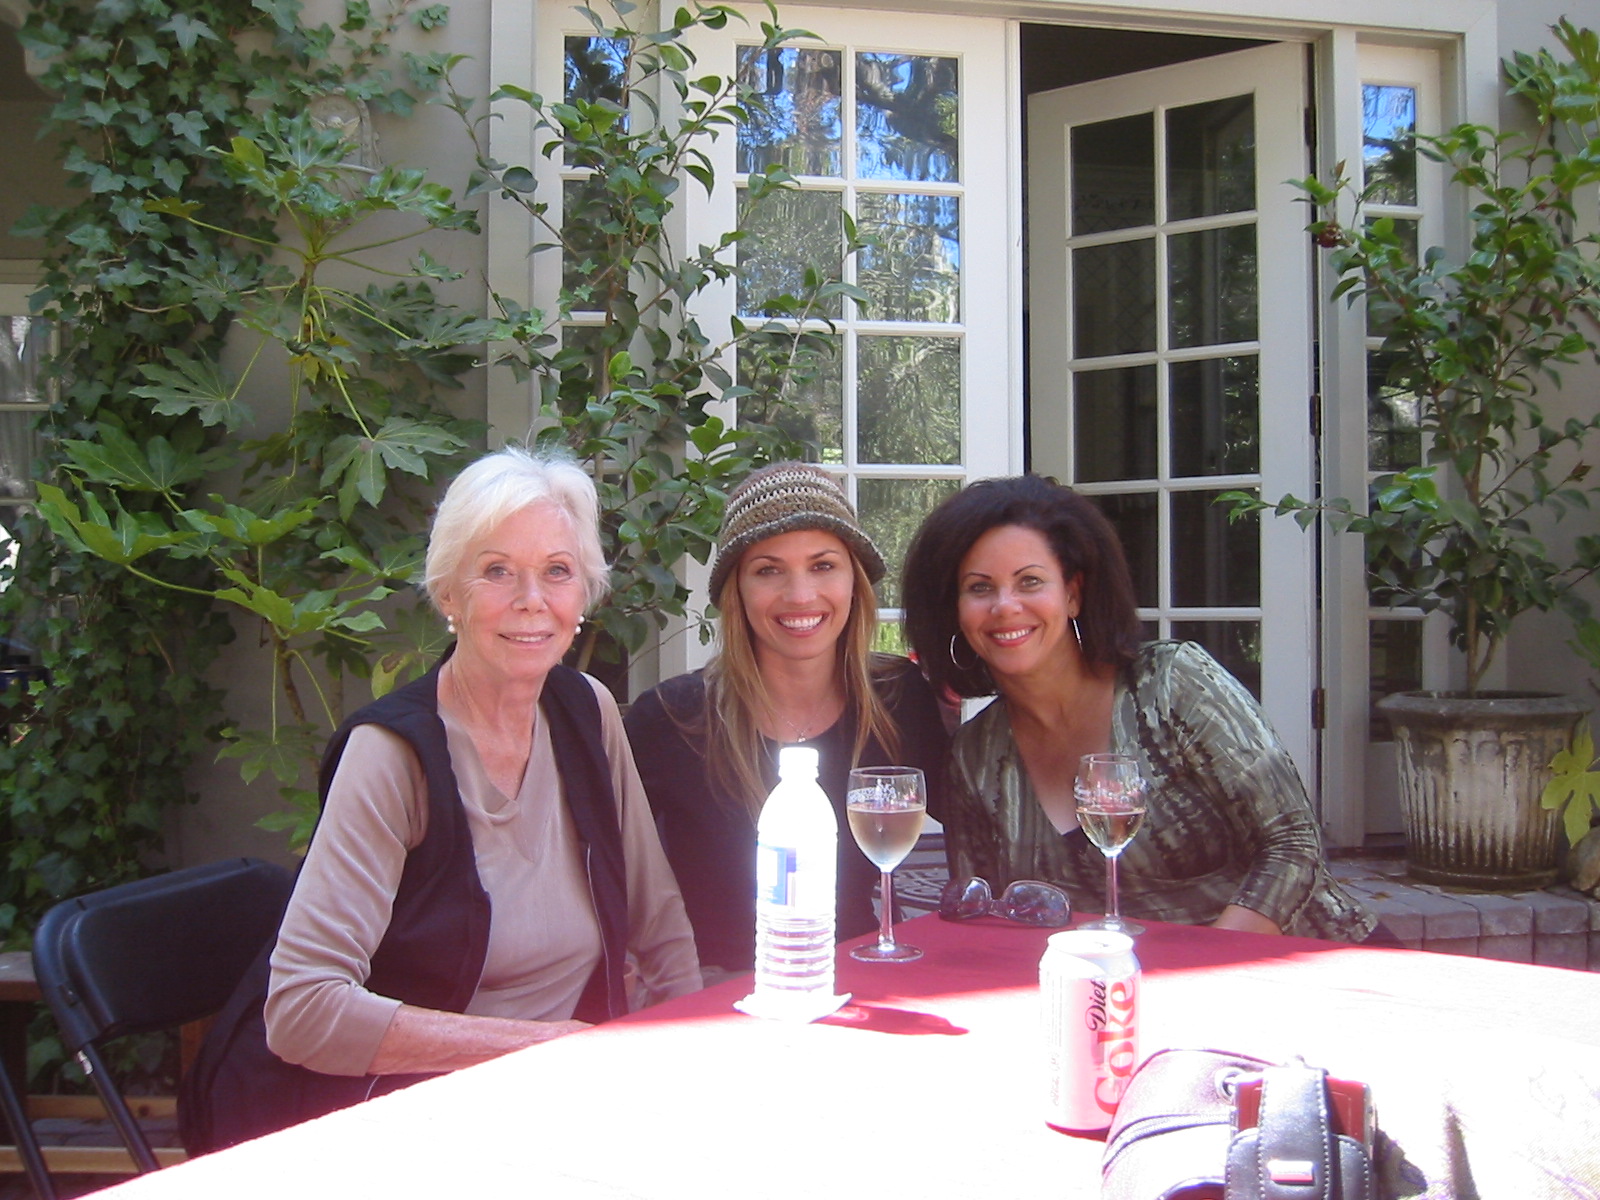 with renowned Author and Hay House founder Louise Hay & Melanie Lococo, Director of Giving at Hay House - set of You Can Heal Your Life